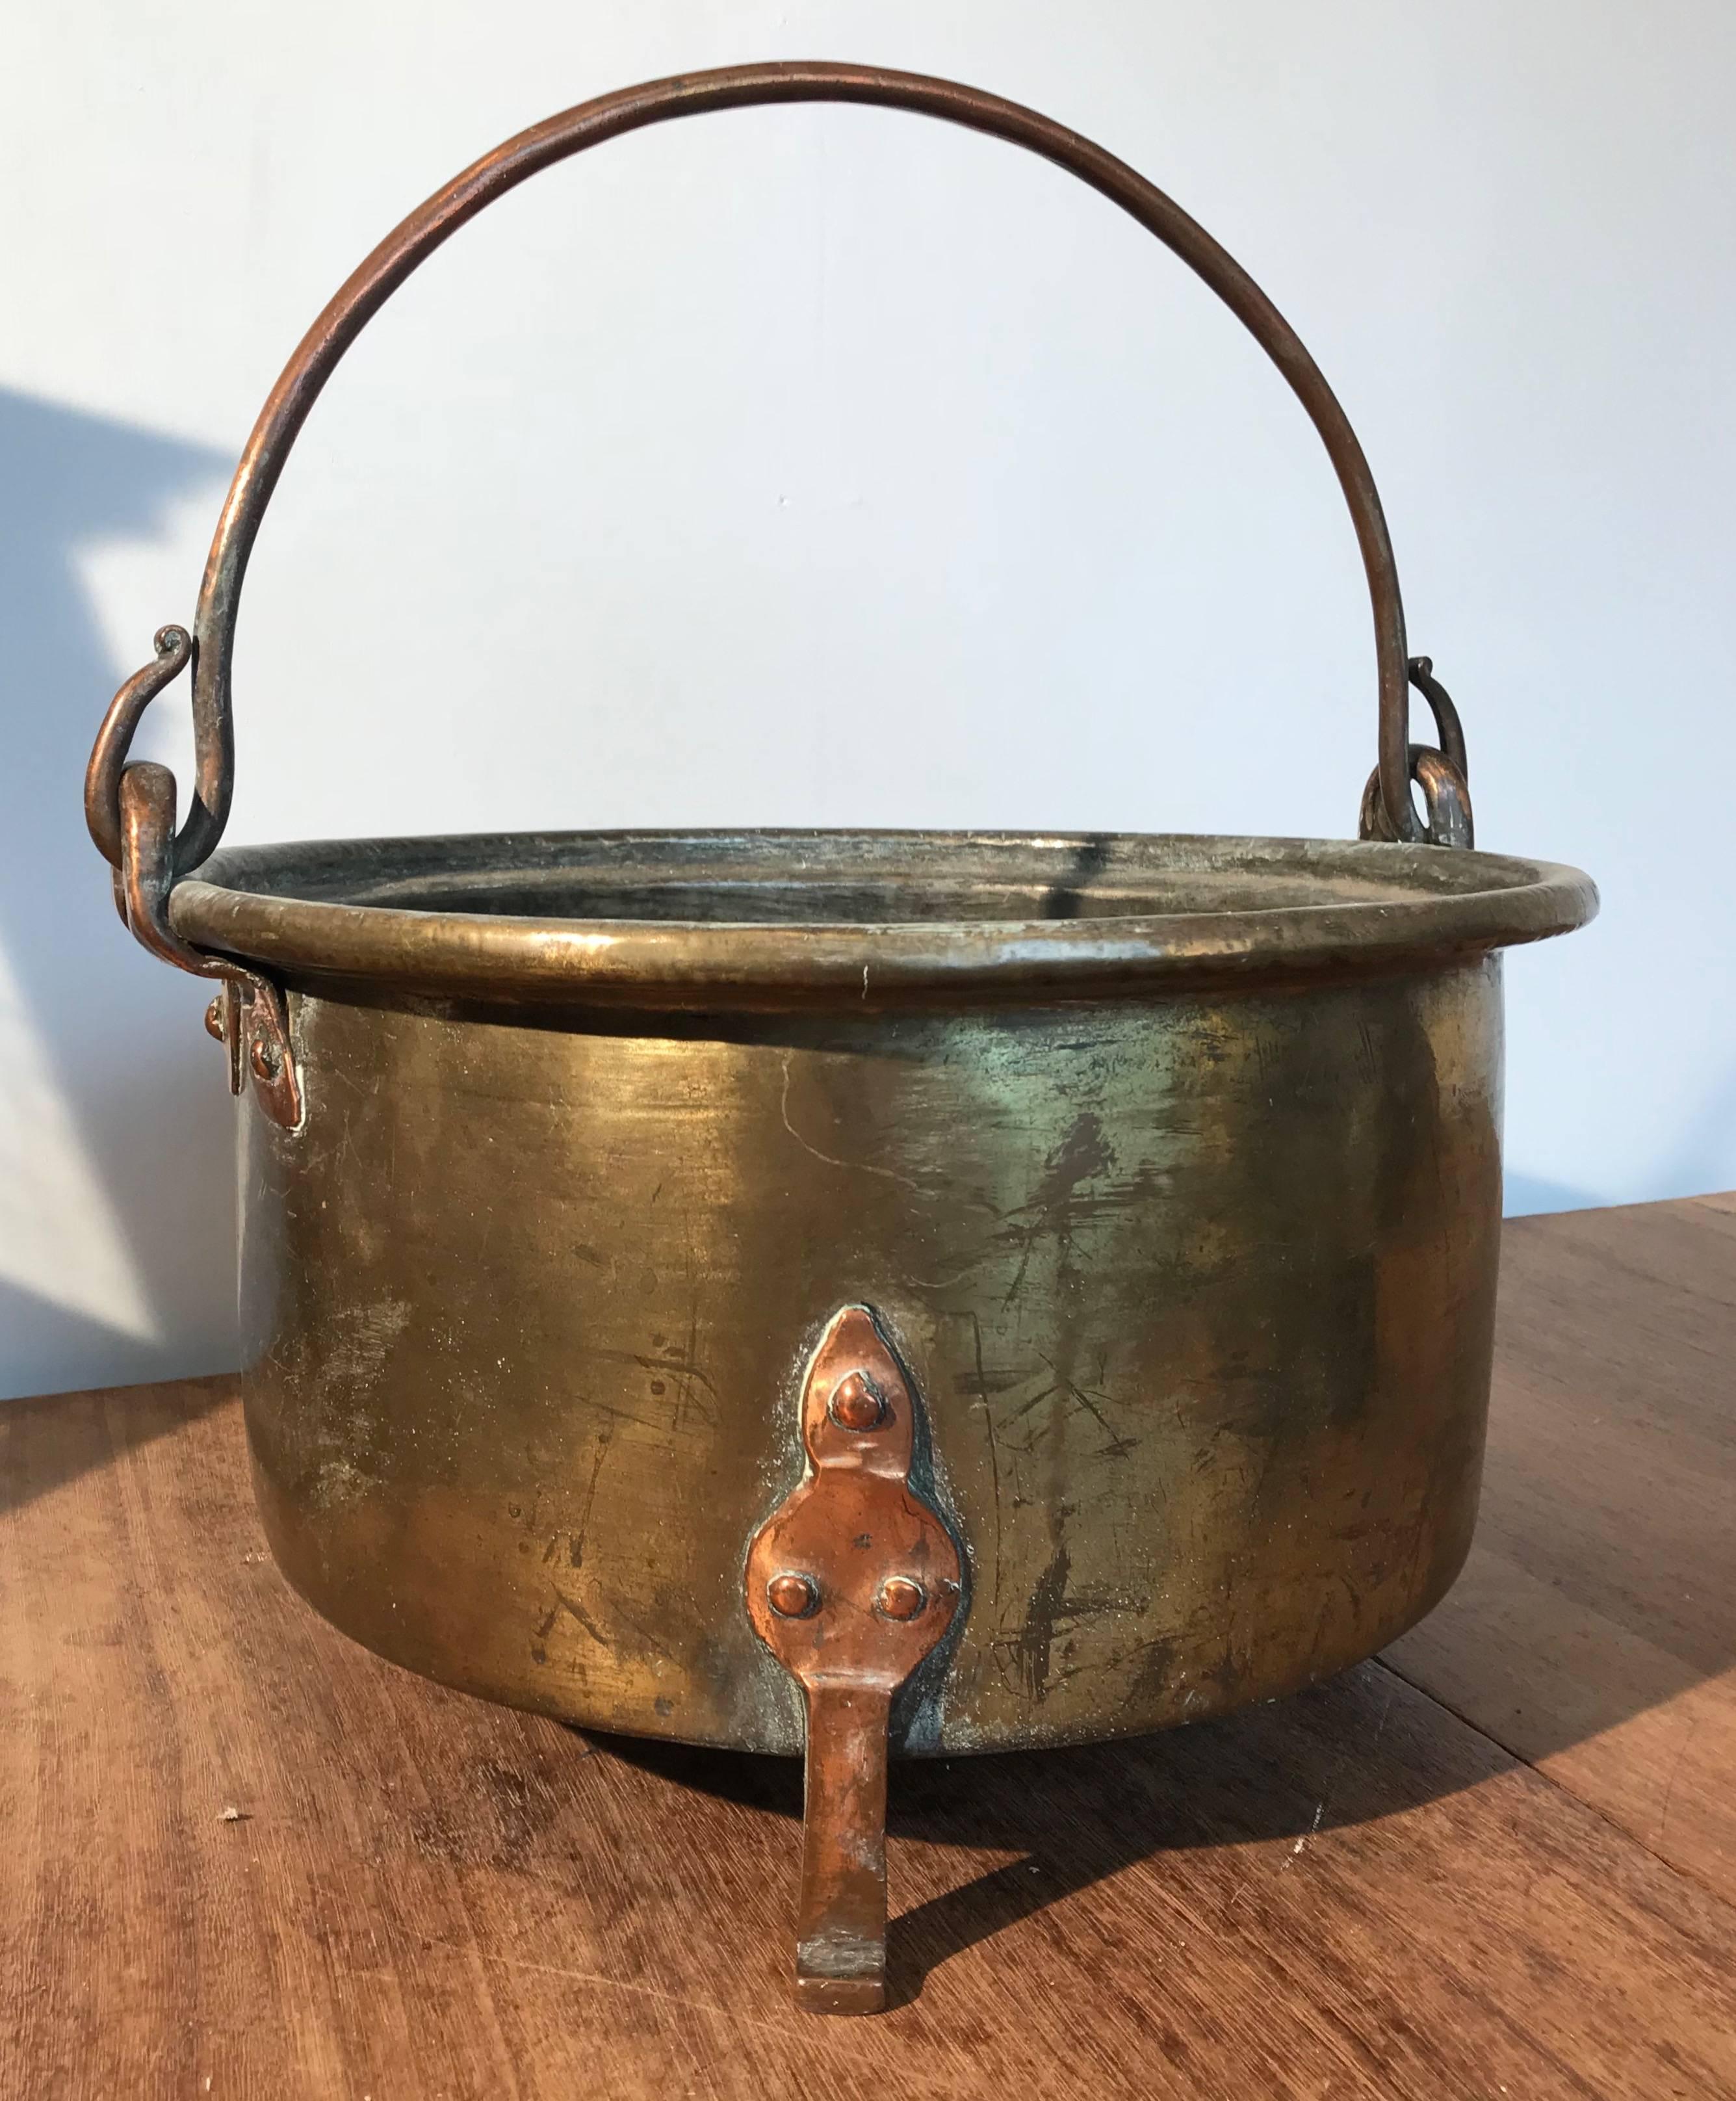 Sizable and thick quality, brass collecting bucket.

This sturdy and heavy brass bucket is another one of our recent finds. When used as a log bucket, this handcrafted antique can single handedly change the look and feel of your fireplace. When used